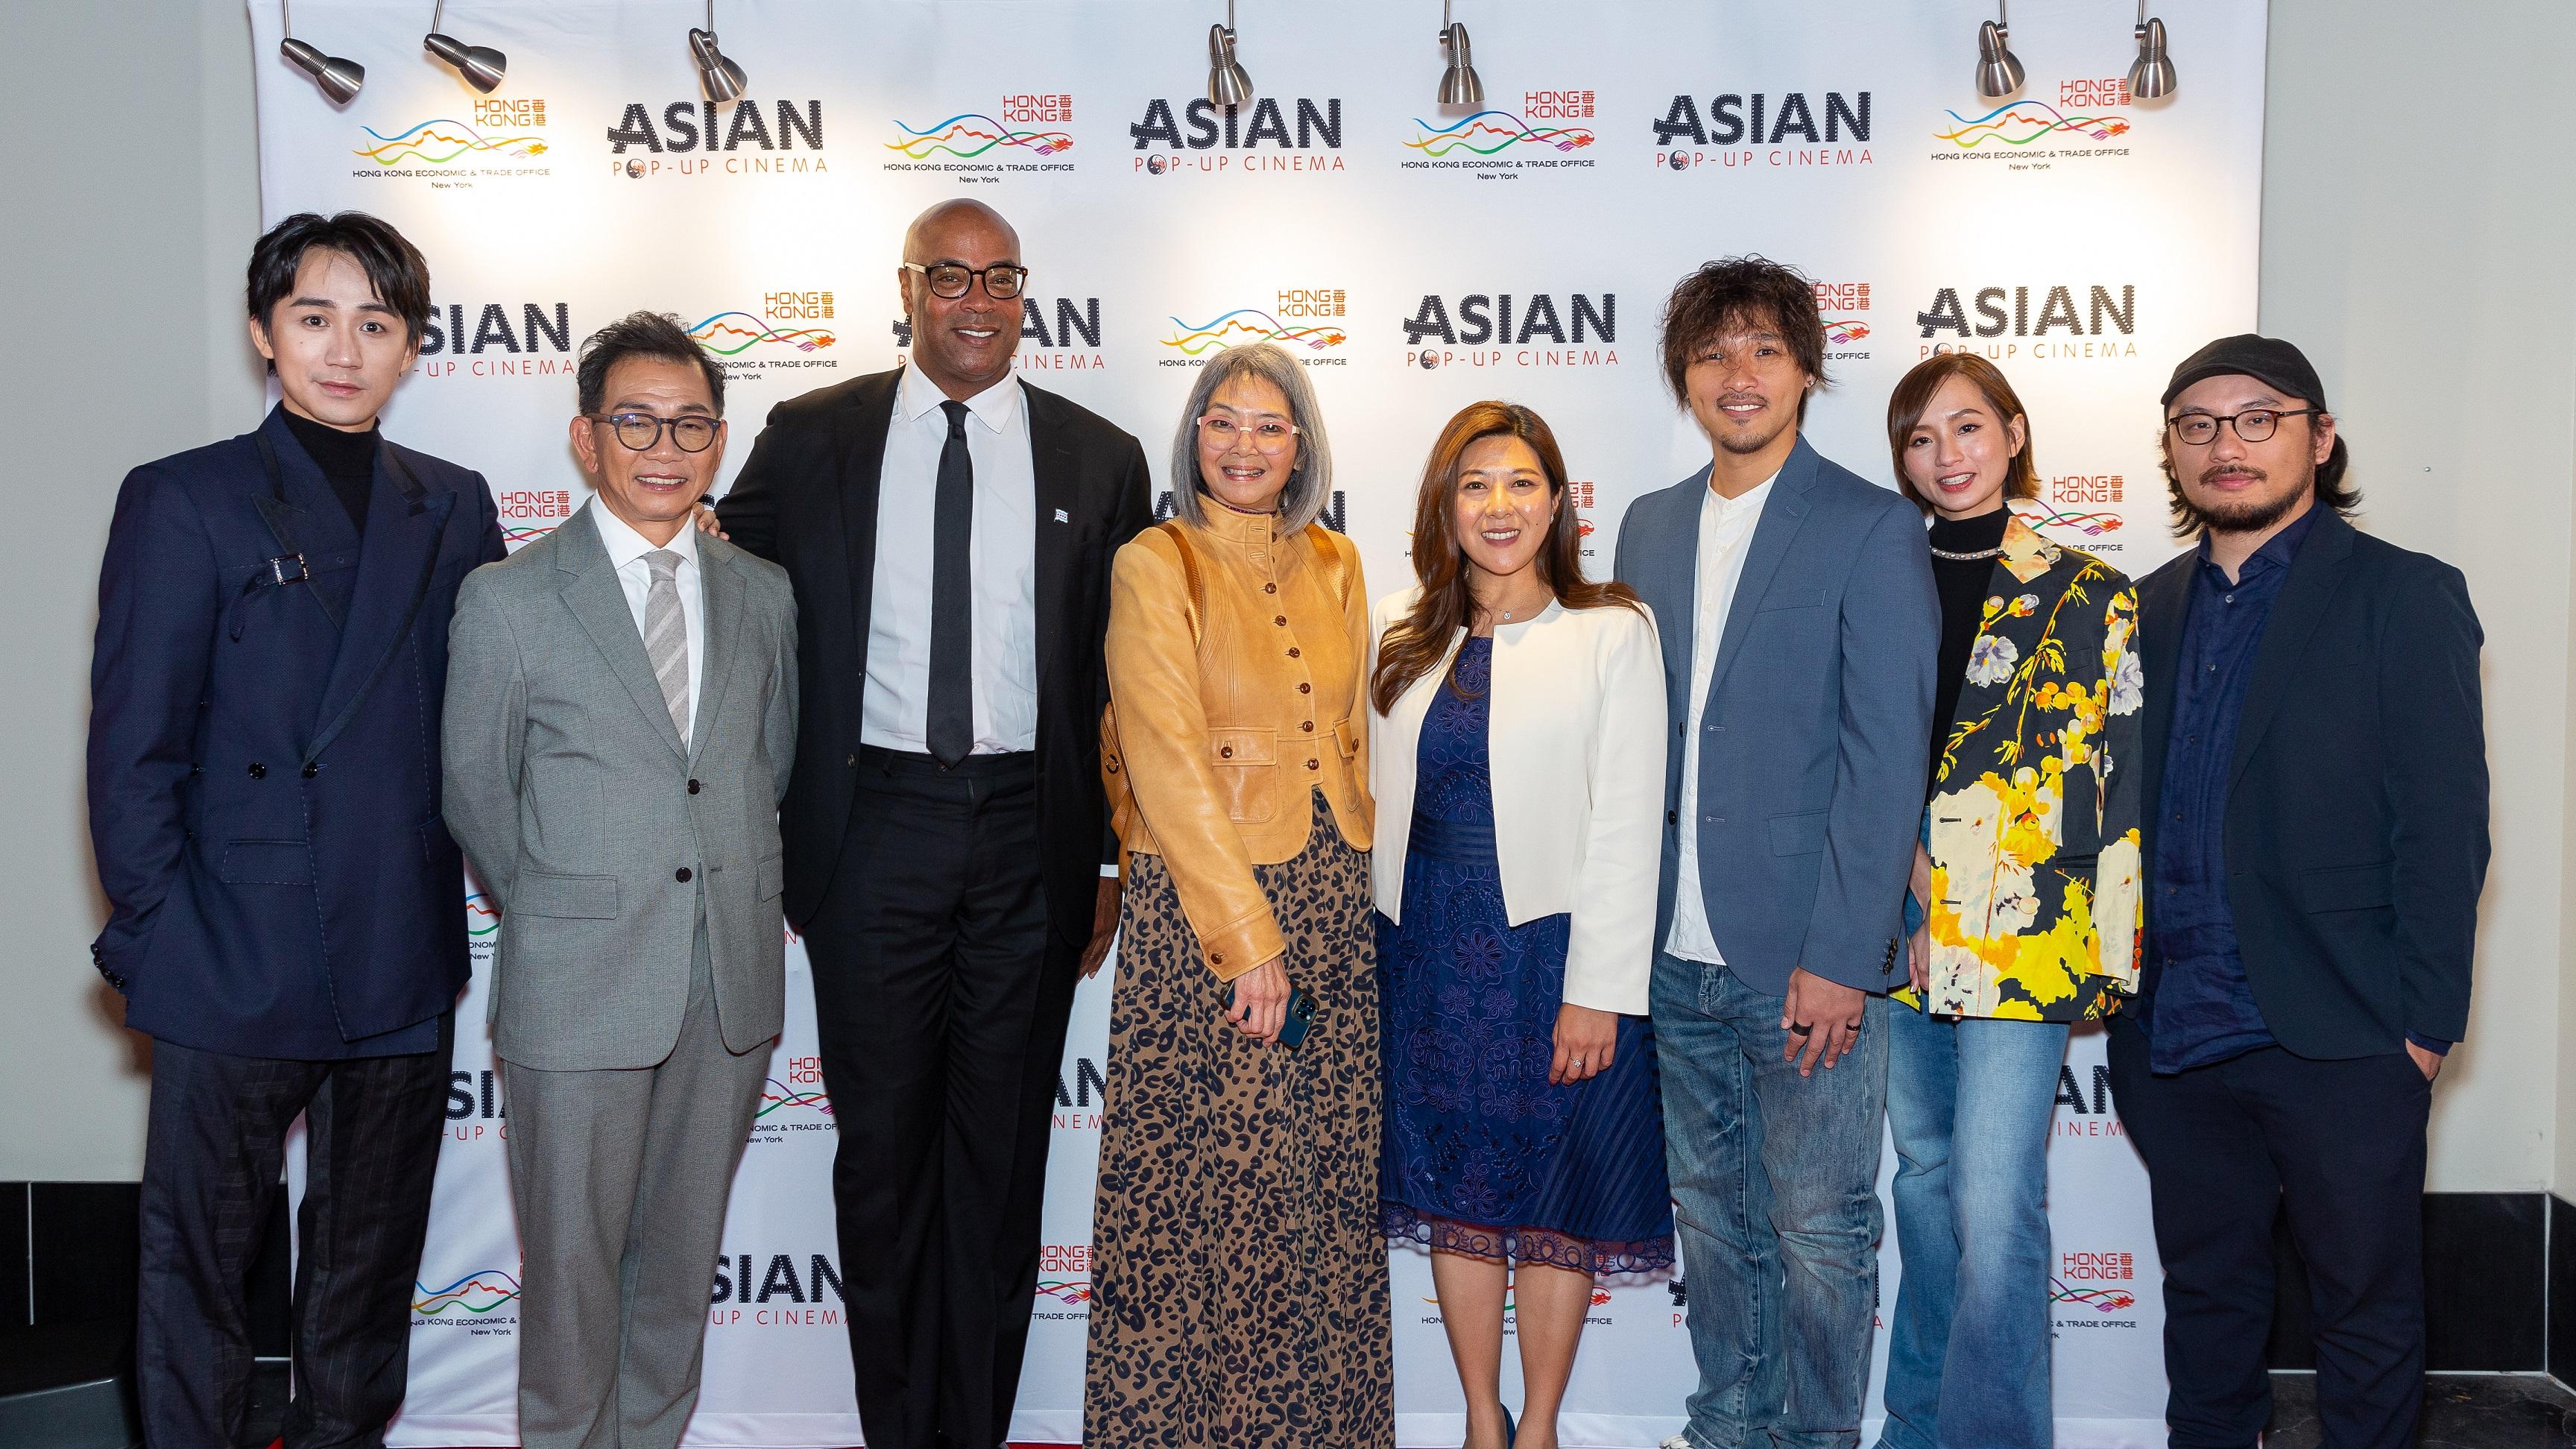 Several Hong Kong film talents across different generations were recognised for their outstanding achievement and contribution to the industry at the awards presentation ceremony of the Asian Pop-Up Cinema (APUC) Season 17 in Chicago on September 16 (Chicago time). Photo shows the Director of the Hong Kong Economic and Trade Office in New York, Ms Maisie Ho (4th right), with (from left) actor Ng Siu-hin; actor Ben Yuen; the Chair of Board of Directors of Choose Chicago, Mr Glenn Eden; the Executive Director of the APUC, Ms Sophia Wong Boccio; actor Wong You-nam; actress Rachel Leung and director Lawrence Kan.